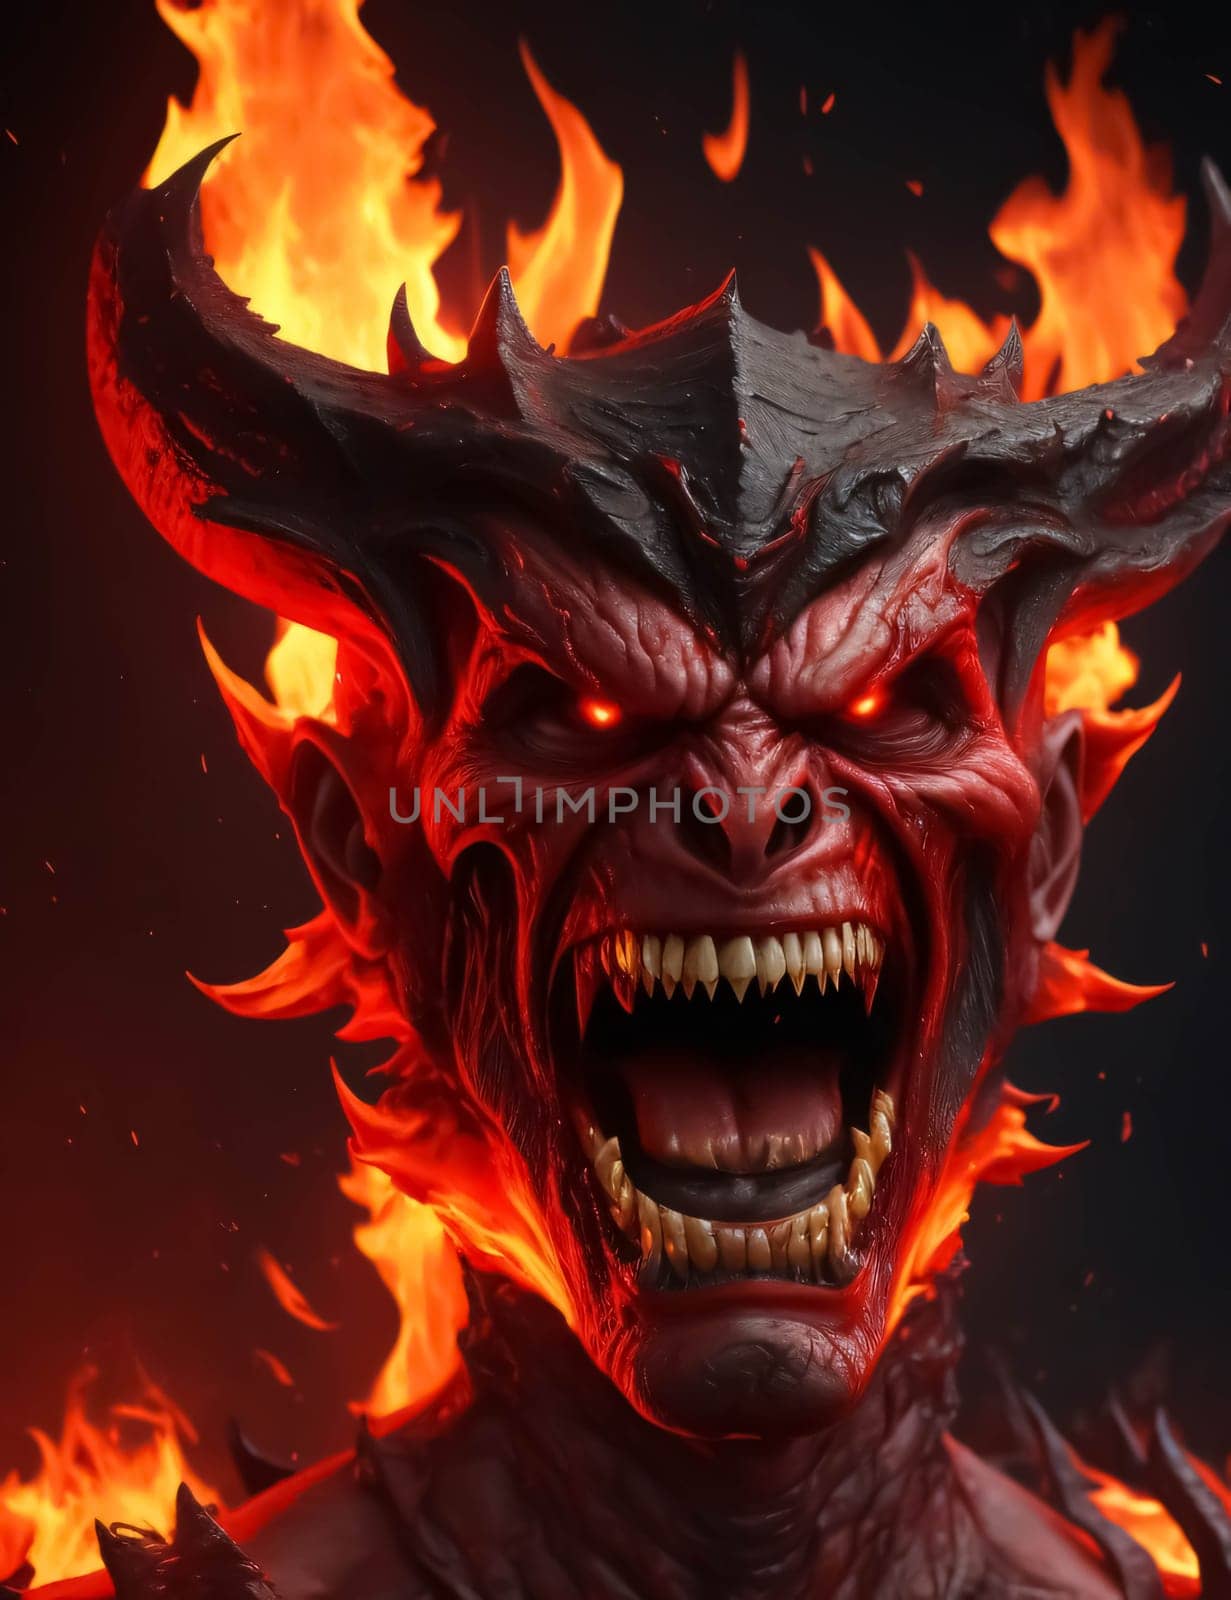 Devil, satan, demon, evil, lucifer, monster in hell and rage, super furious, super scary villain character by antoksena